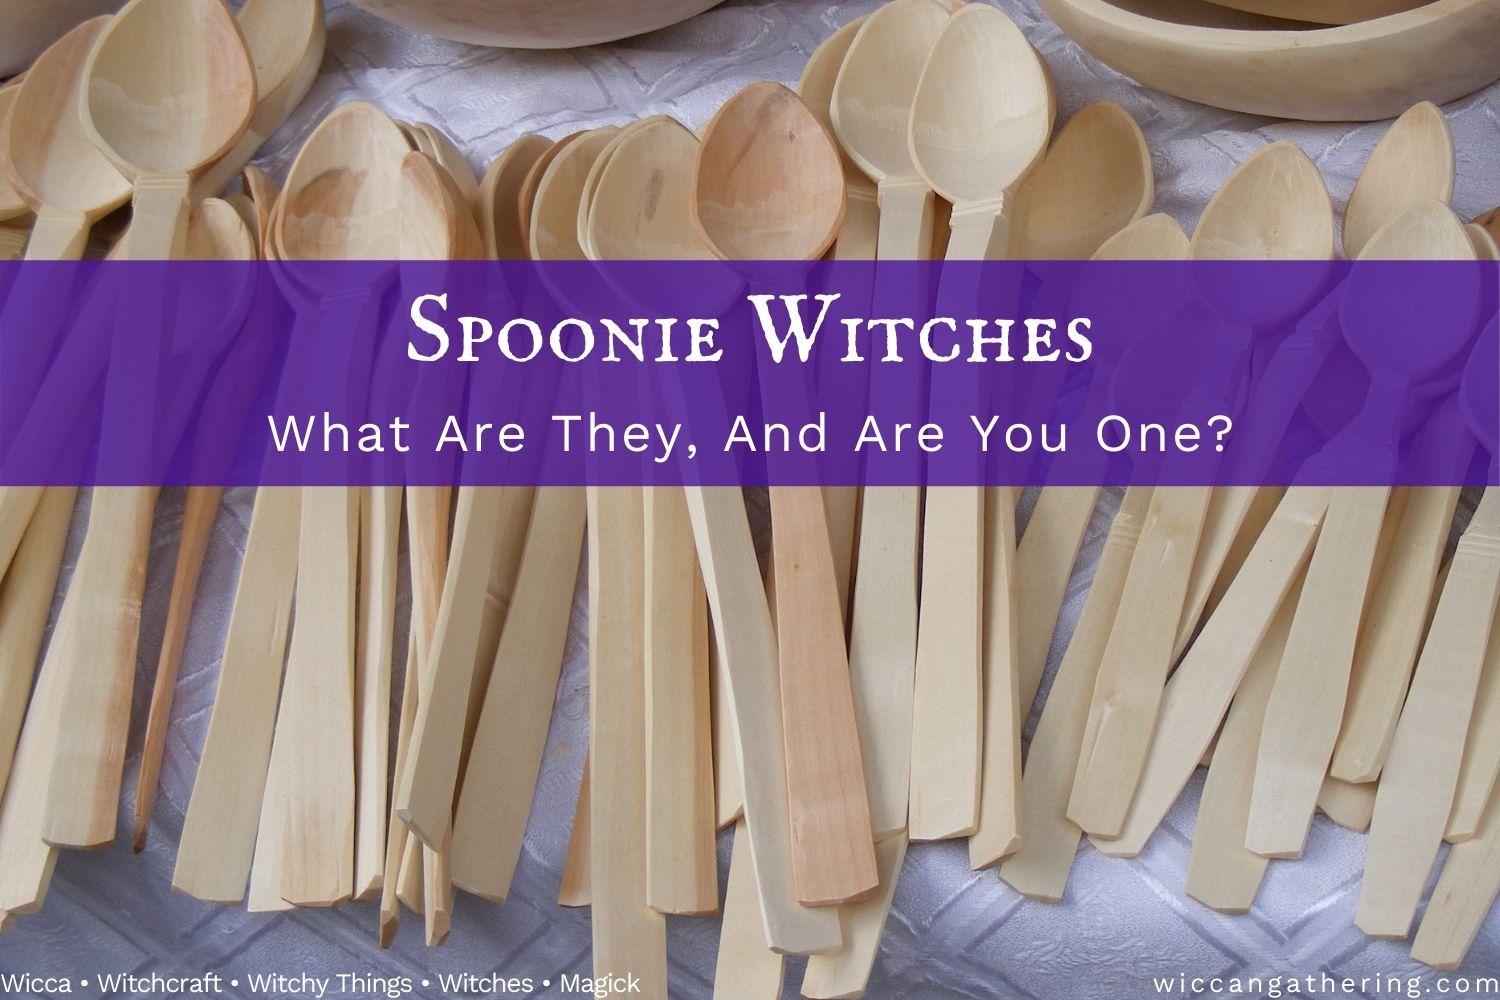 What Is A Spoonie Witch